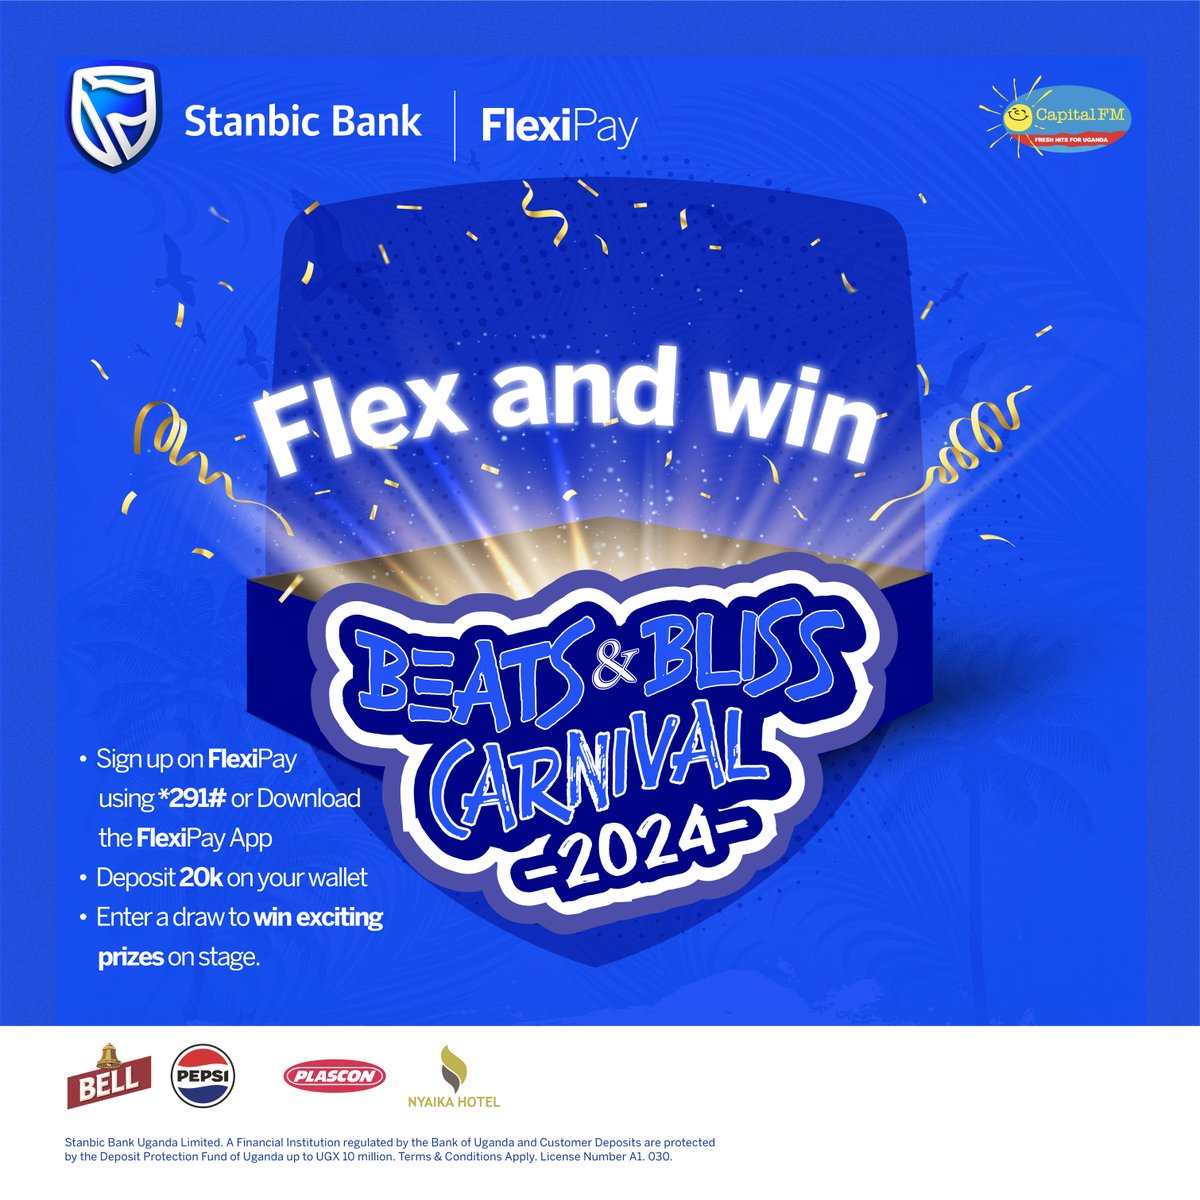 Join us tomorrow for the Bliss and Beats Carnival at the Buhinga Stadium. Come enjoy live music by your favorite artistes, games & delicious food Sign up for FlexiPay, deposit 20K for a chance to win amazing prizes. Dial *291# to get started. #BeatsAndBlissCarnival2024